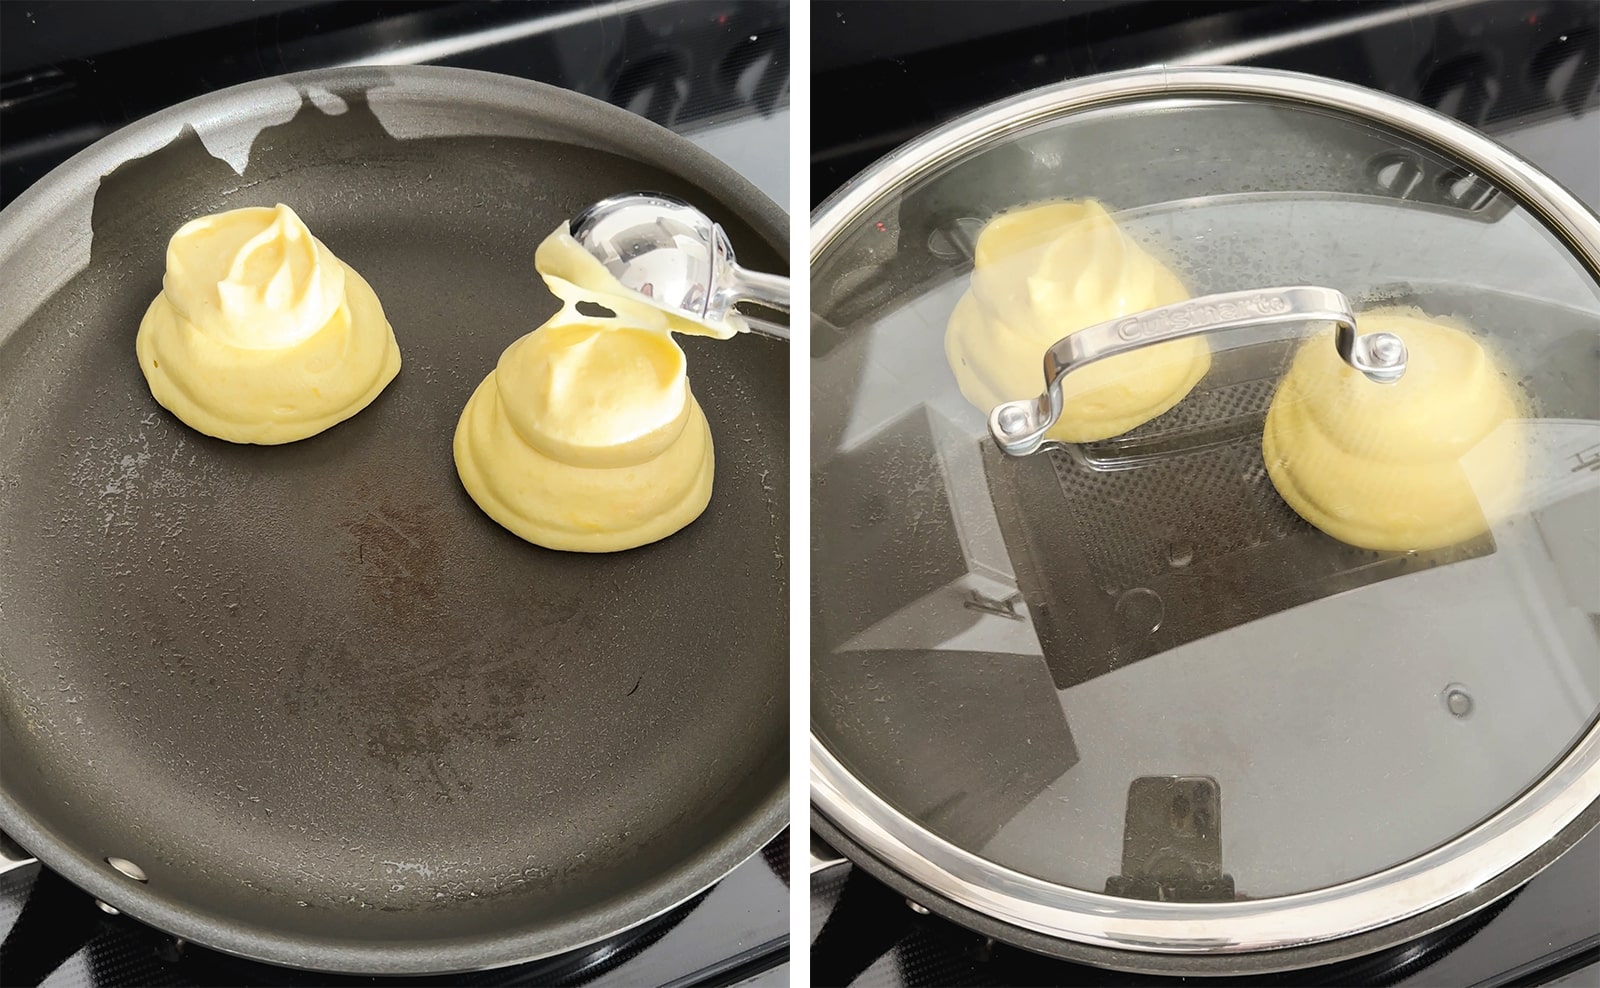 Left to right: adding another scoop of souffle pancake batter on top of a pile of batter, cooking pancakes in a pan with the lid on.